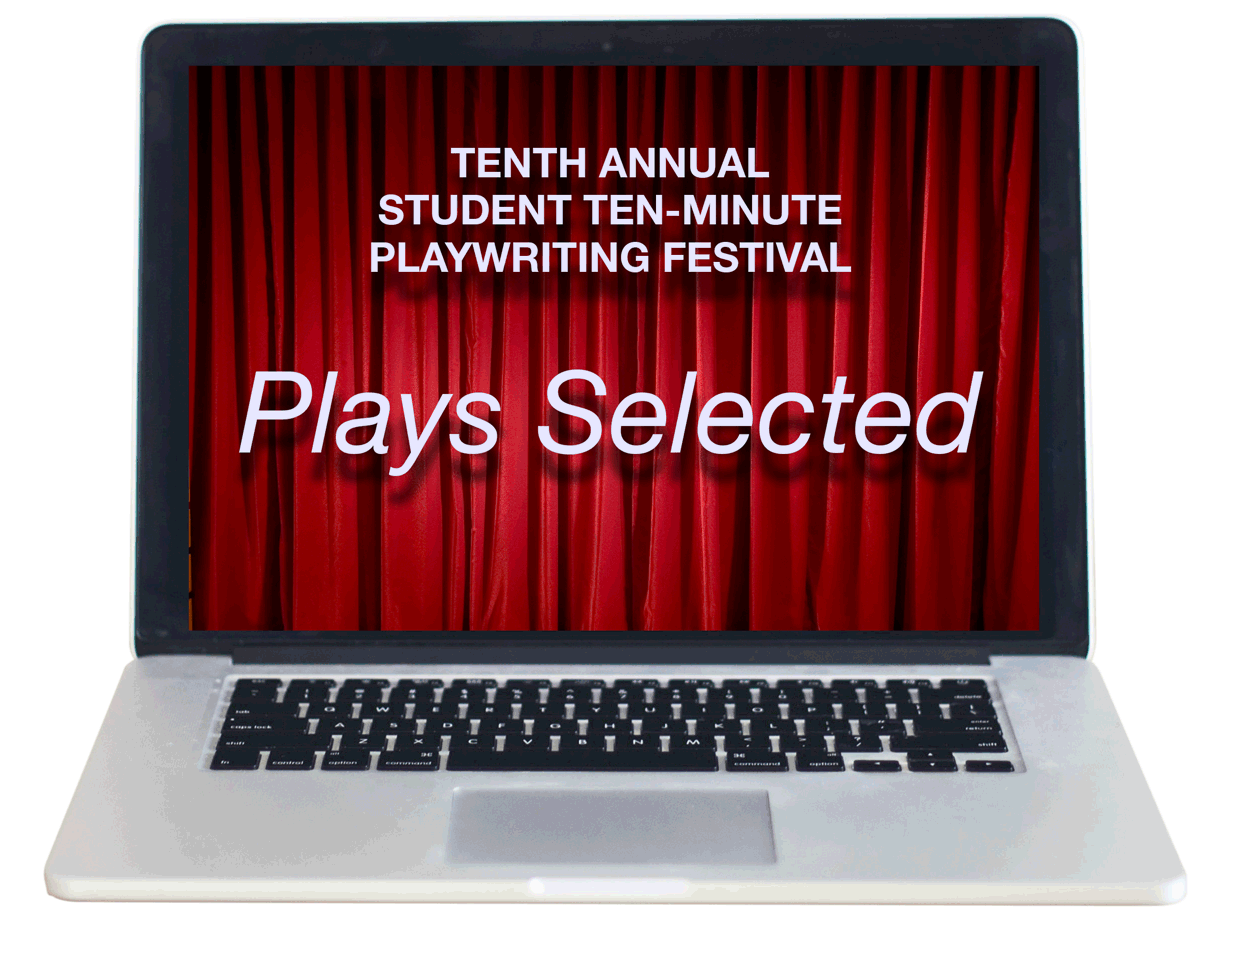 Laptop screen shows "Plays Selected"